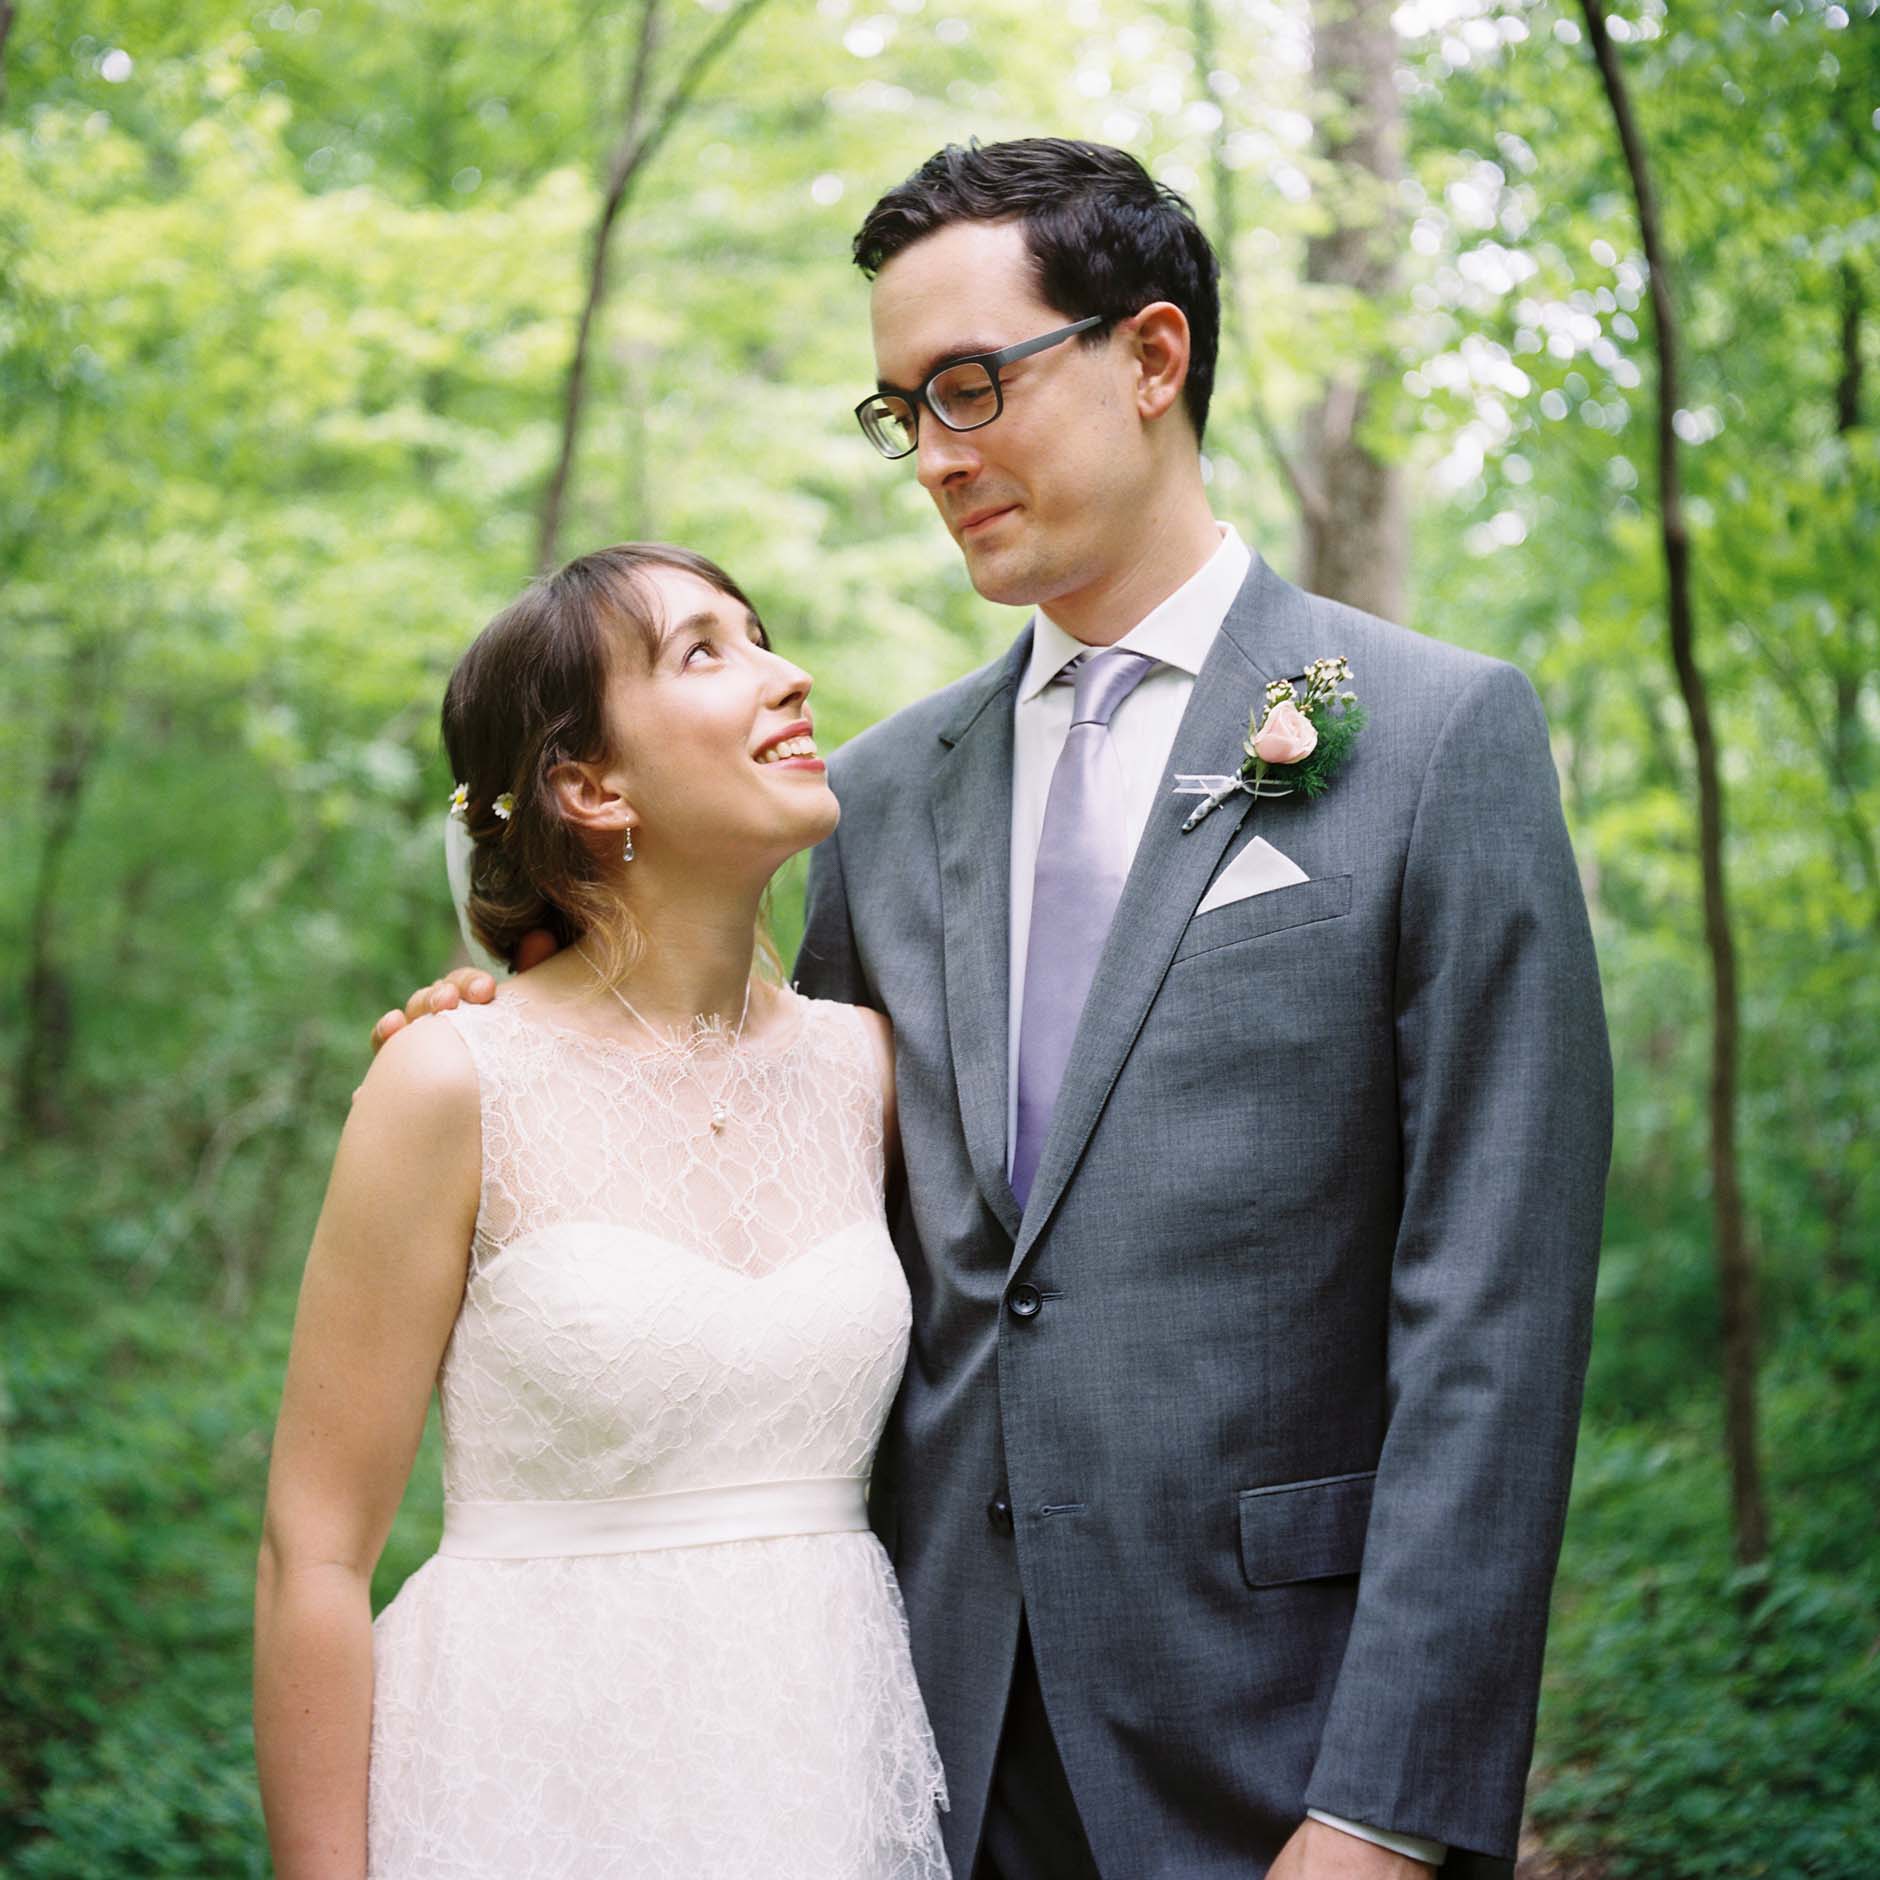 Scenes from the wedding of Joe Toth and Kirstin Wade at McCormick's Creek State Park near Spencer, Indiana on Saturday, May 12, 2018. (Photo by James Brosher)